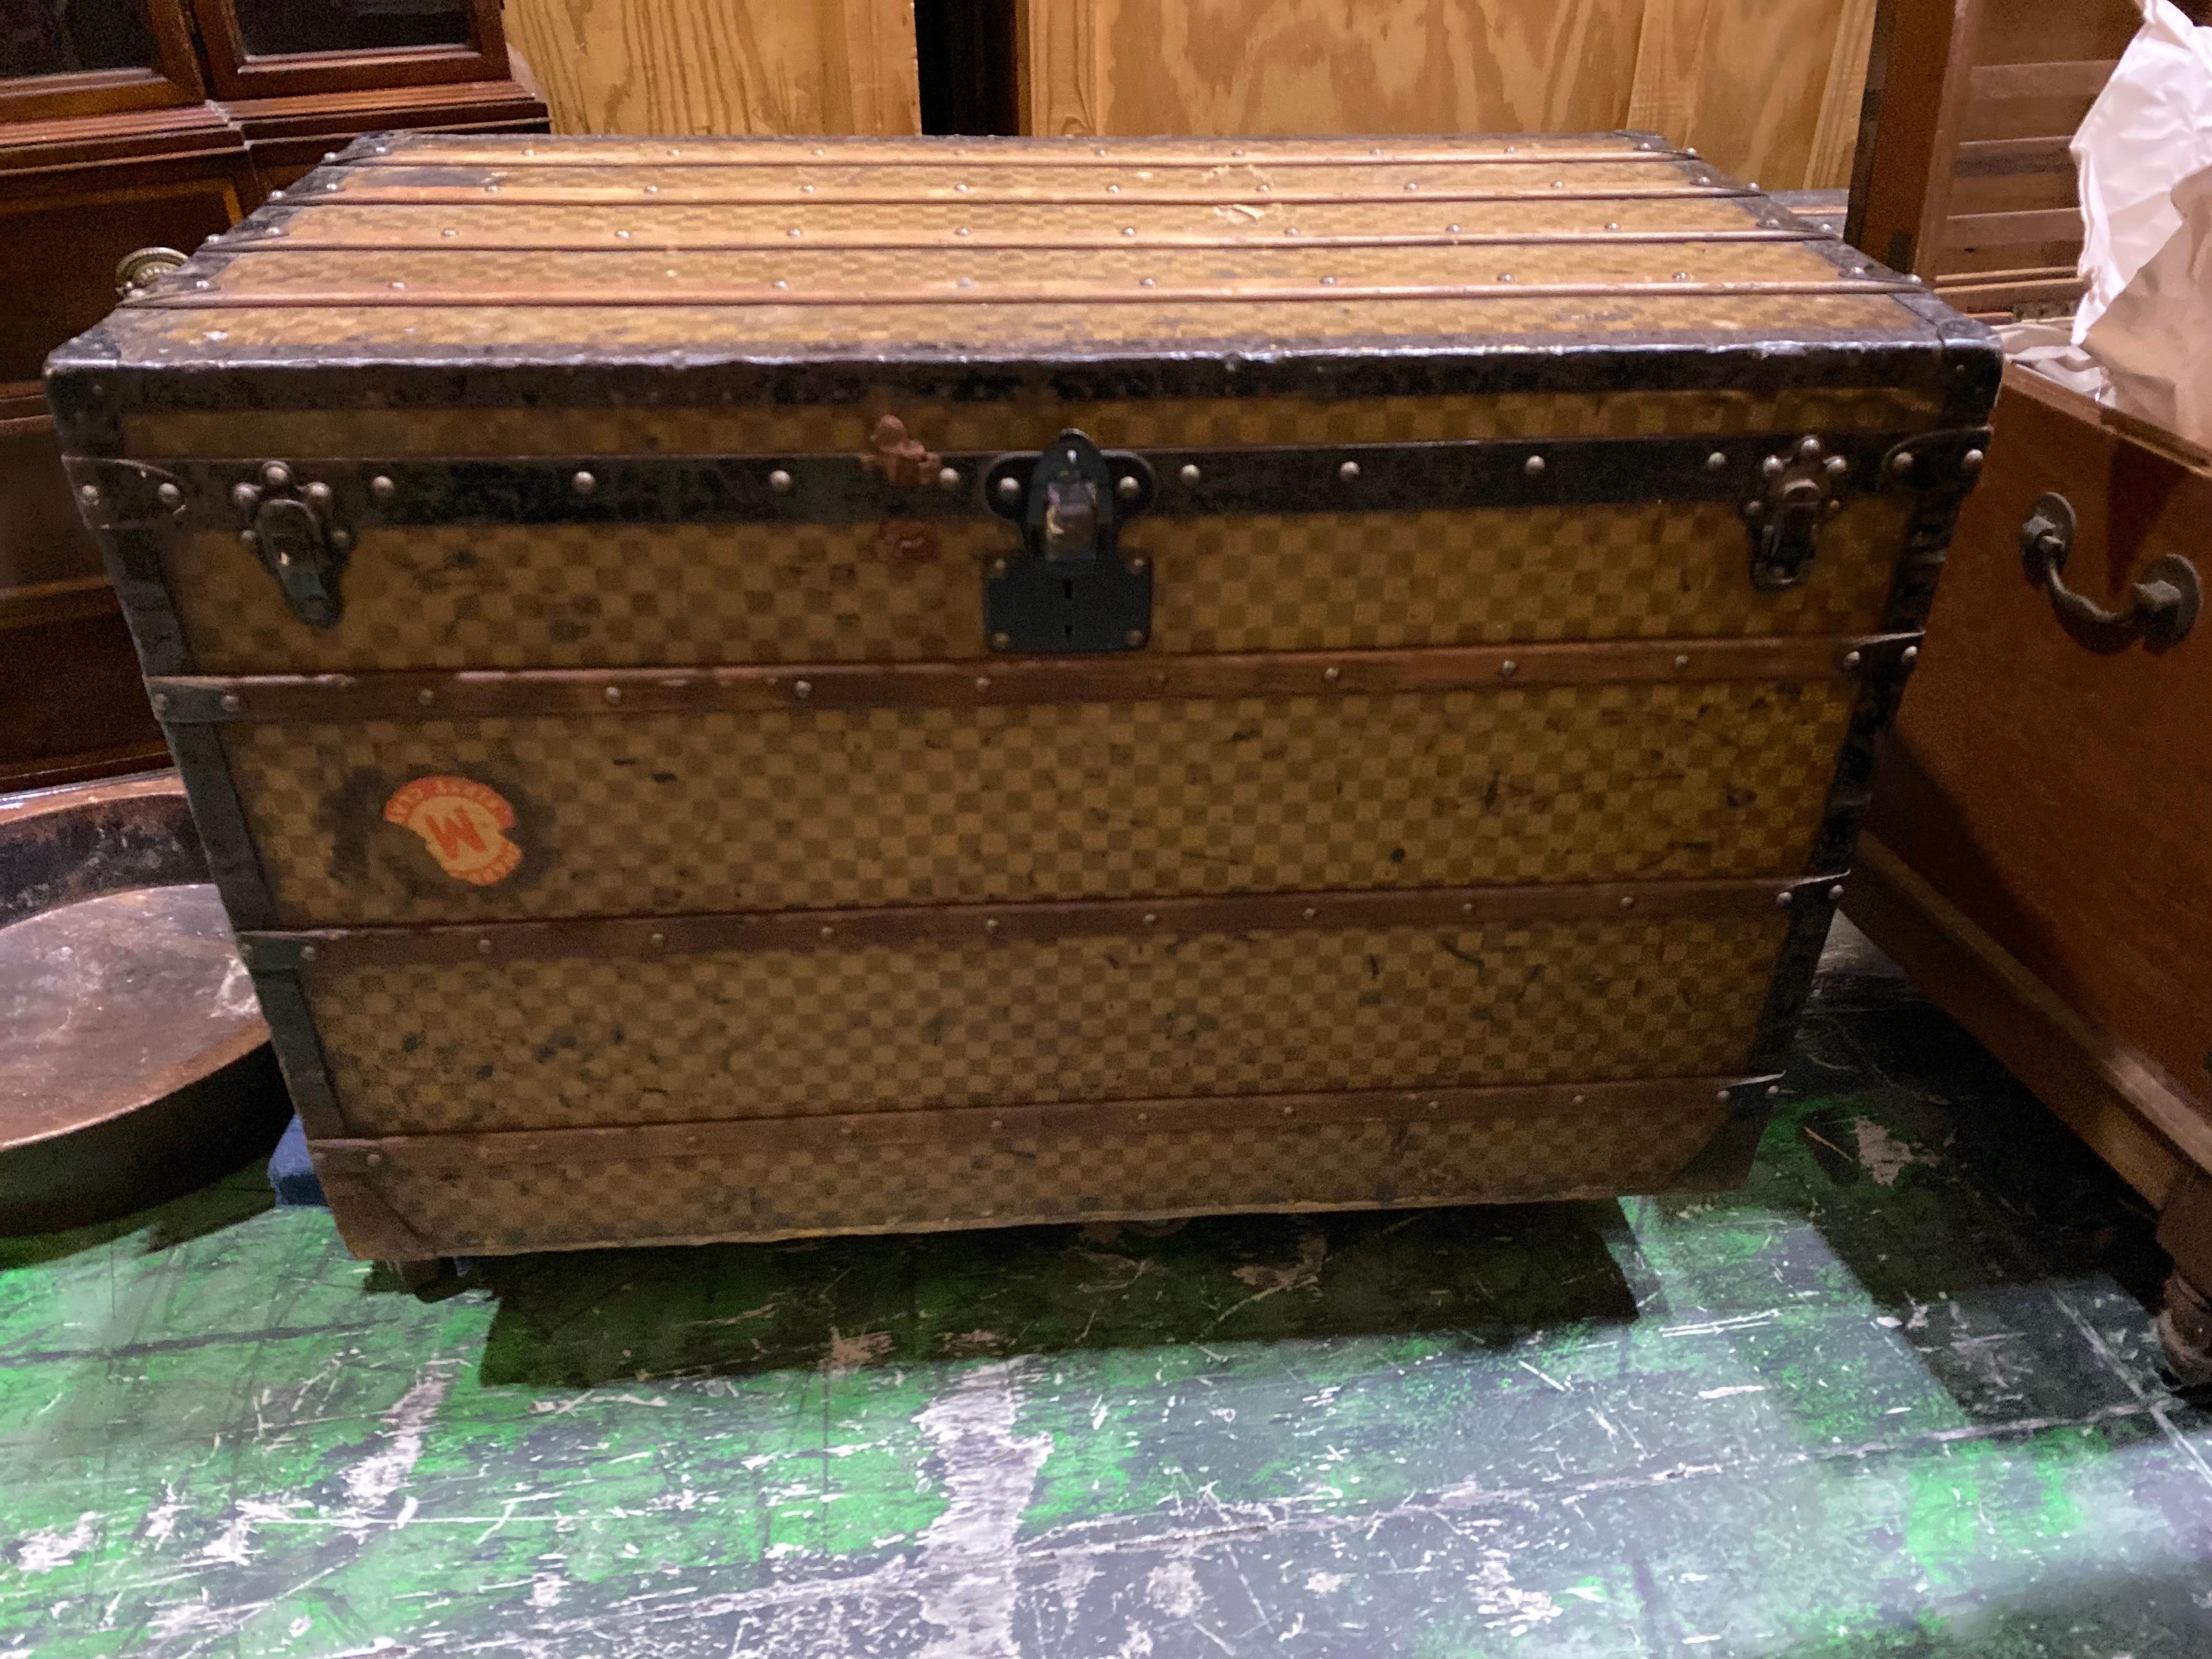 A very large-sized antique 19th century Louis Vuitton steamer trunk in the famous Damier canvas, circa 1888-1890, metal borders and reinforced wooden laths. The inside was retrofitted as a cedar chest. The entire inside is lined with cedar plus two